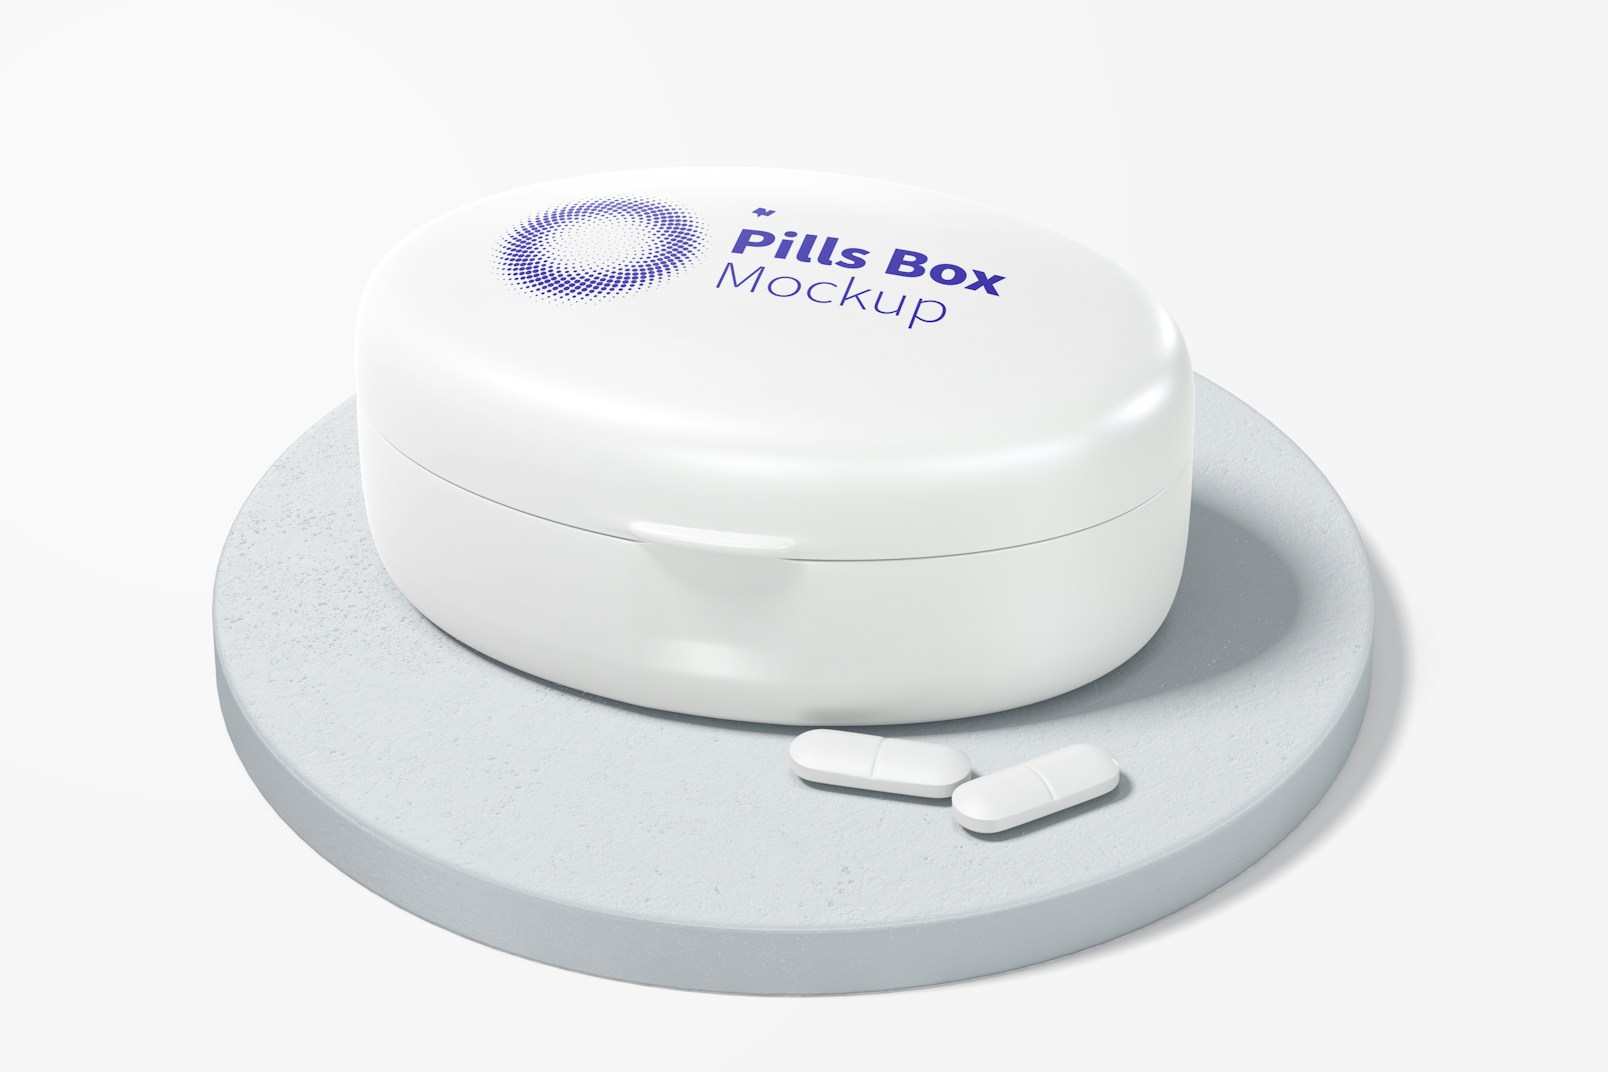 Oval Pills Box Mockup, Front View